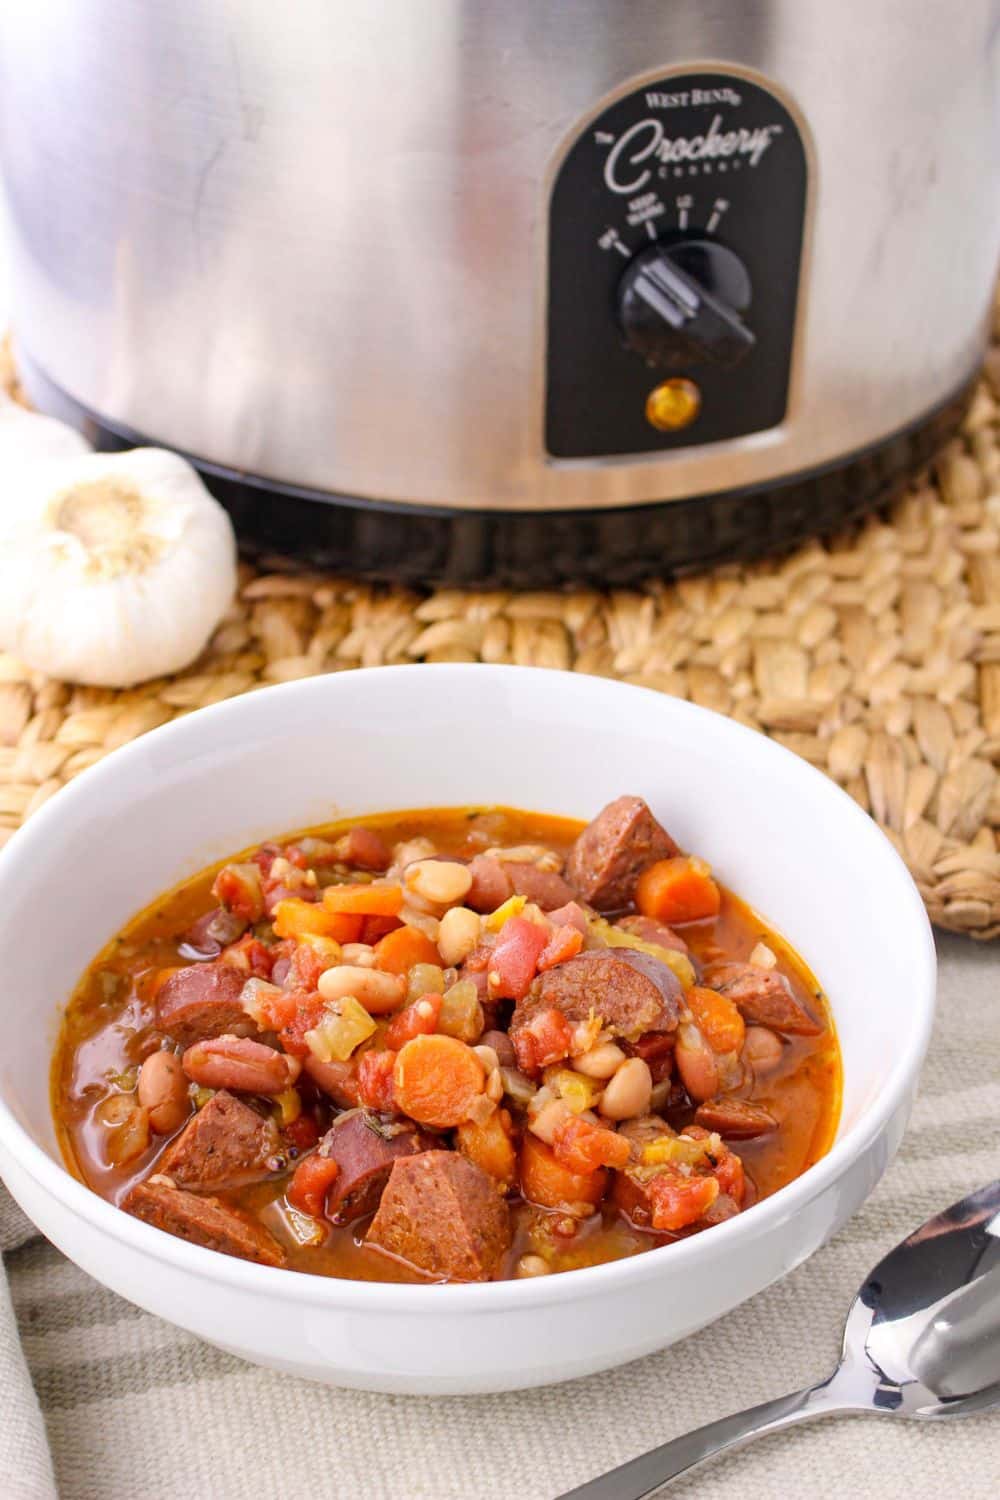 Cajun Bean Soup in a bowl with a slow cooker in the background